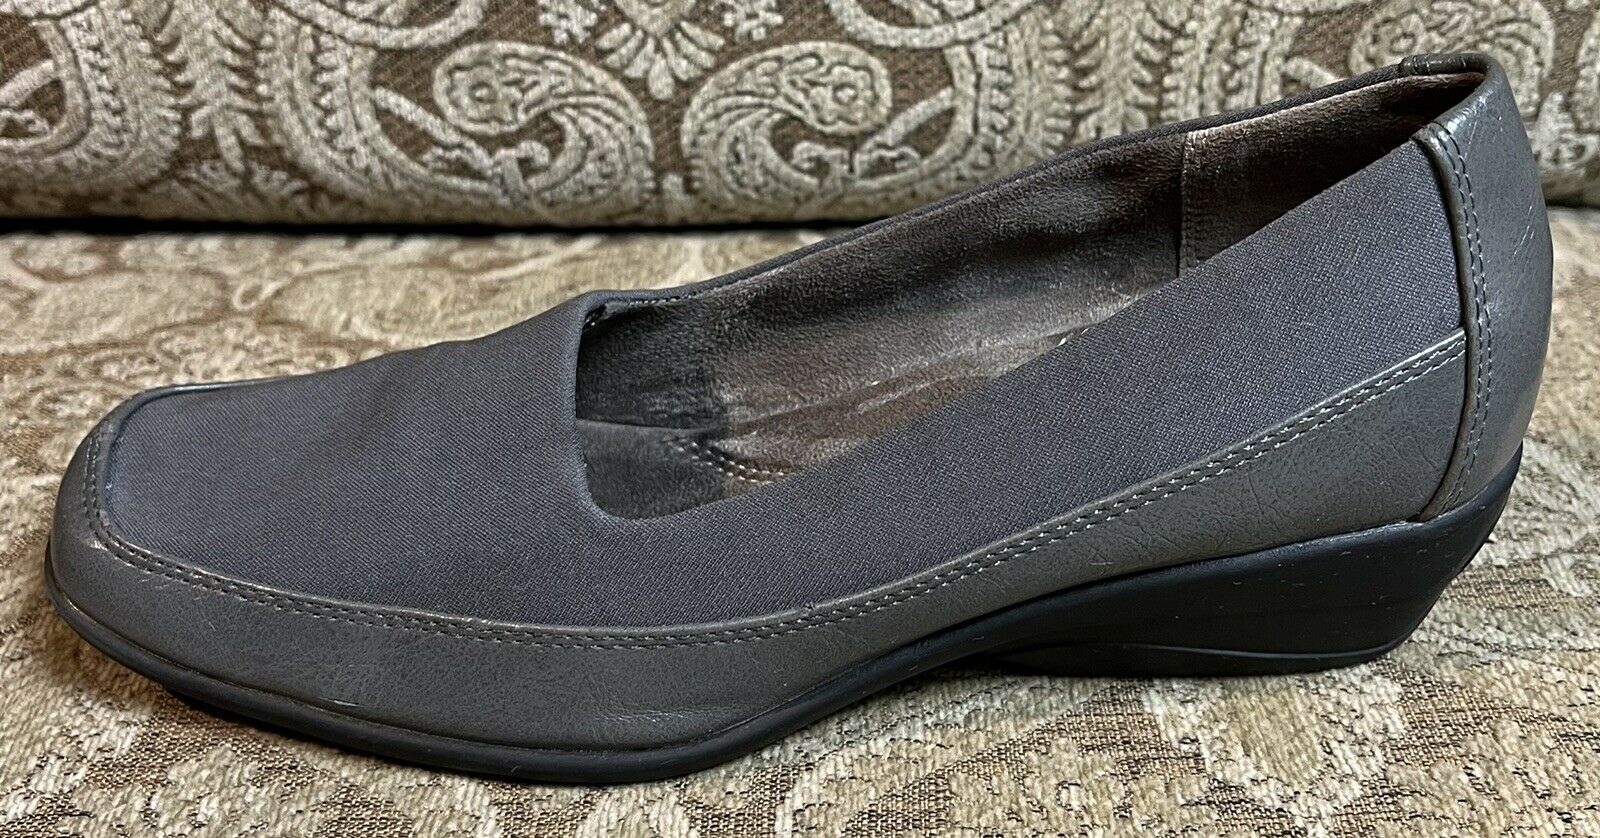 Aerosoles Womens Slip-On Casual Shoes Riverbed Gray Size 7.5 M